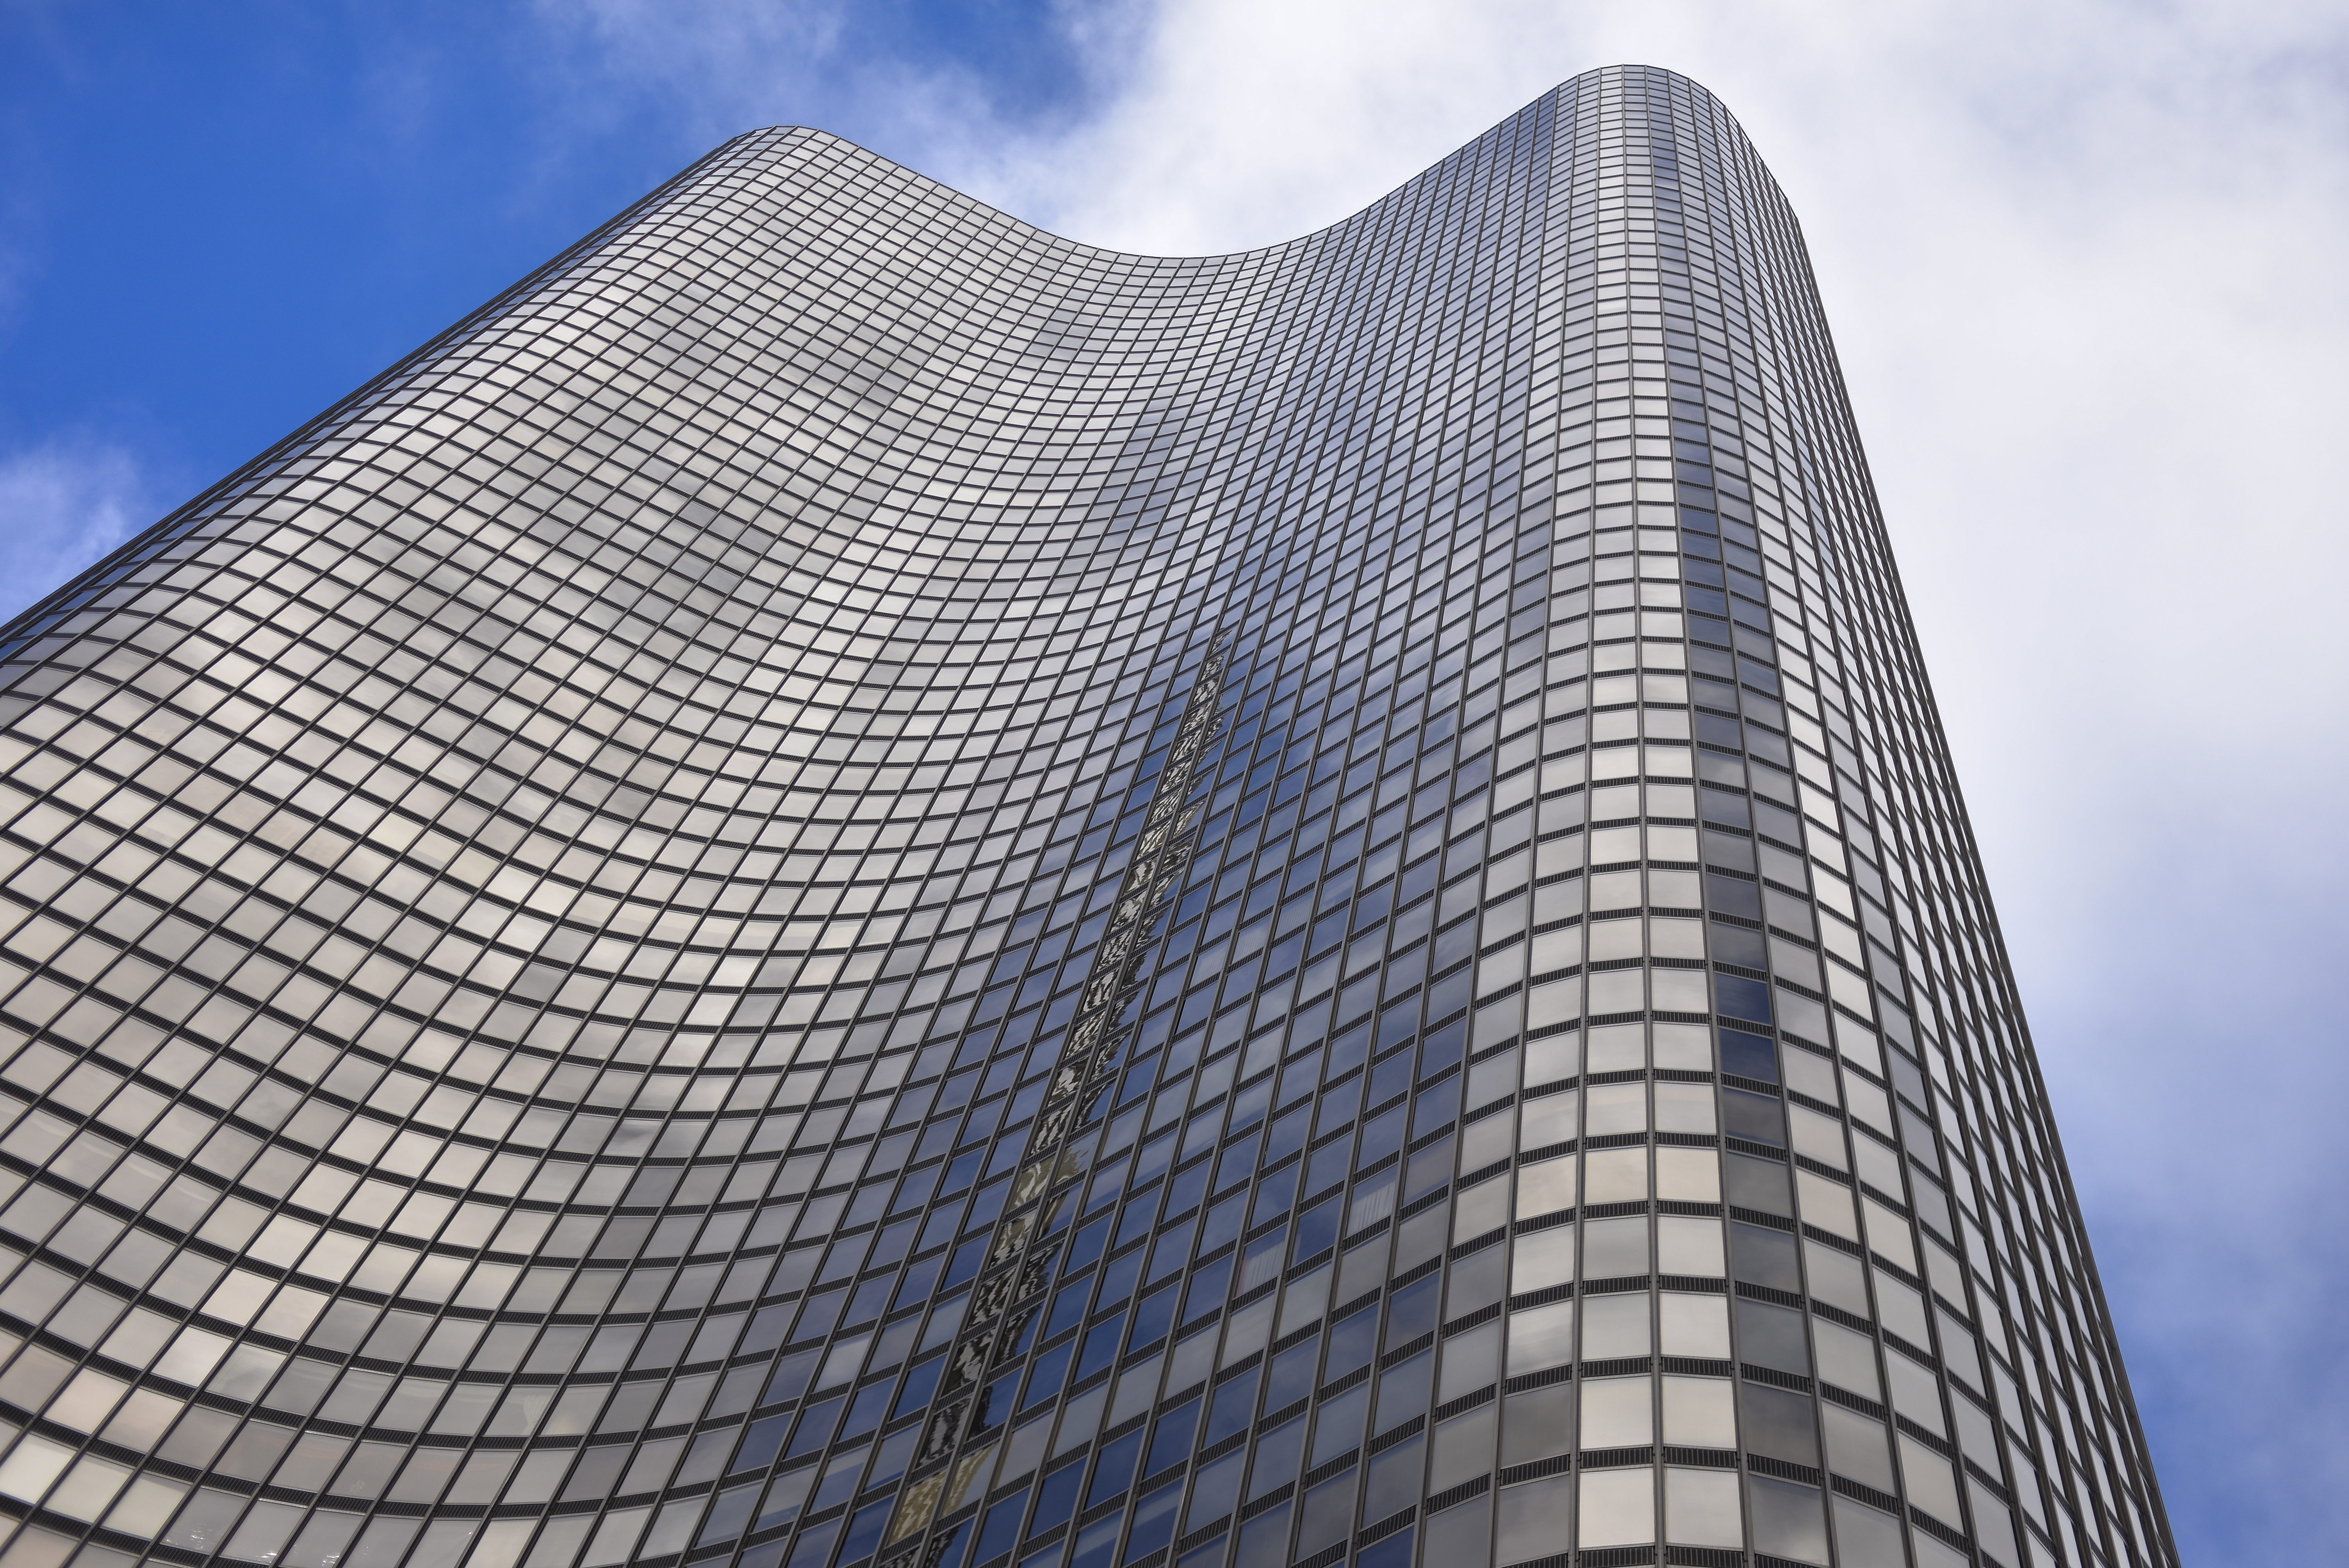 Looking up a a black, 70-story building with three curving lobes clad in a dark glass and aluminum facade.